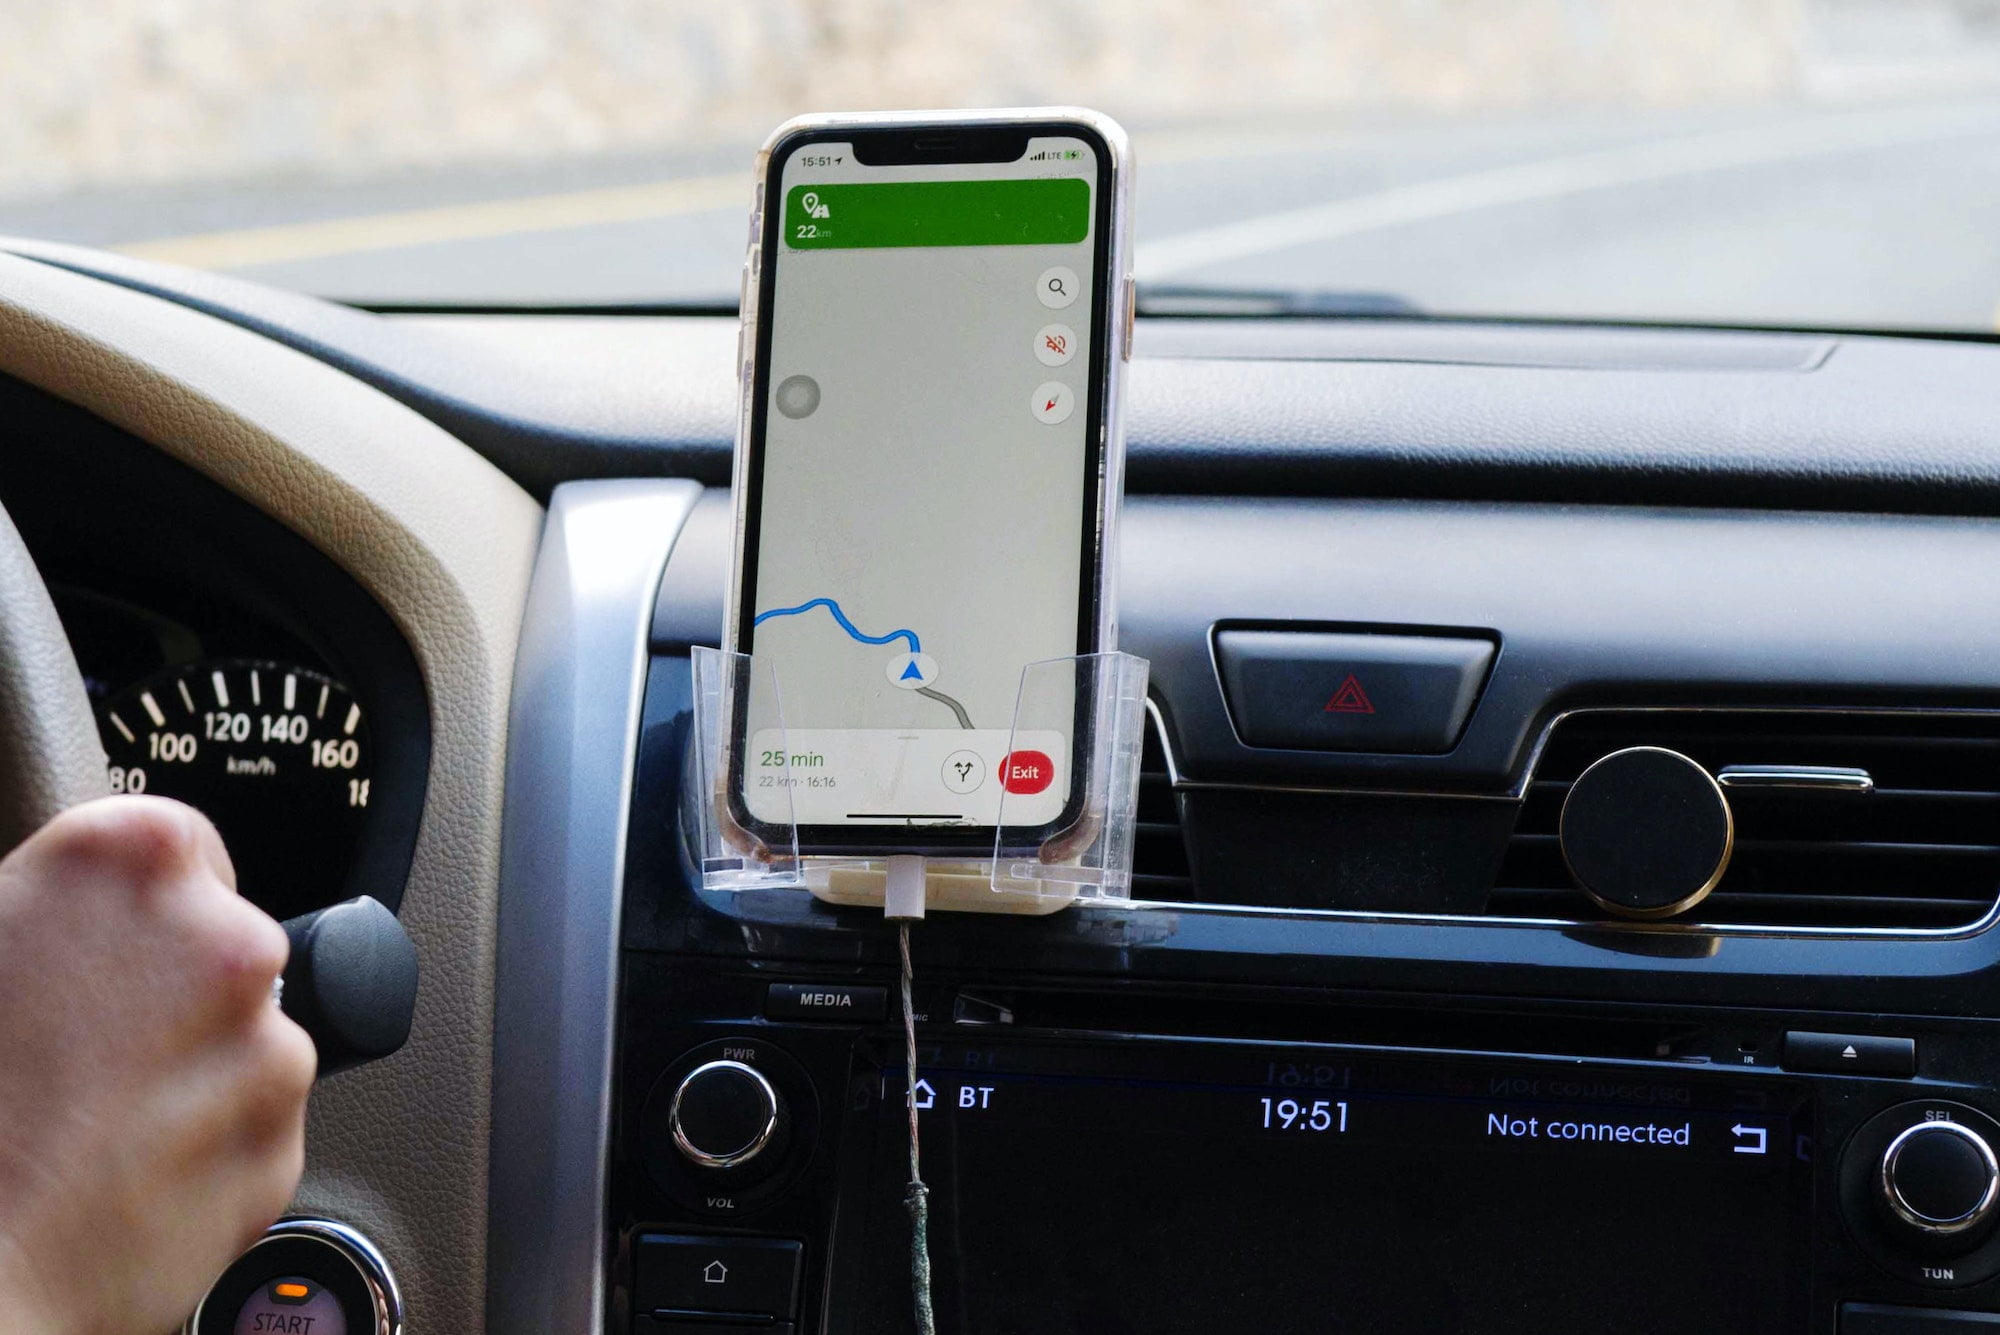 Map directions on the smartphone in the car